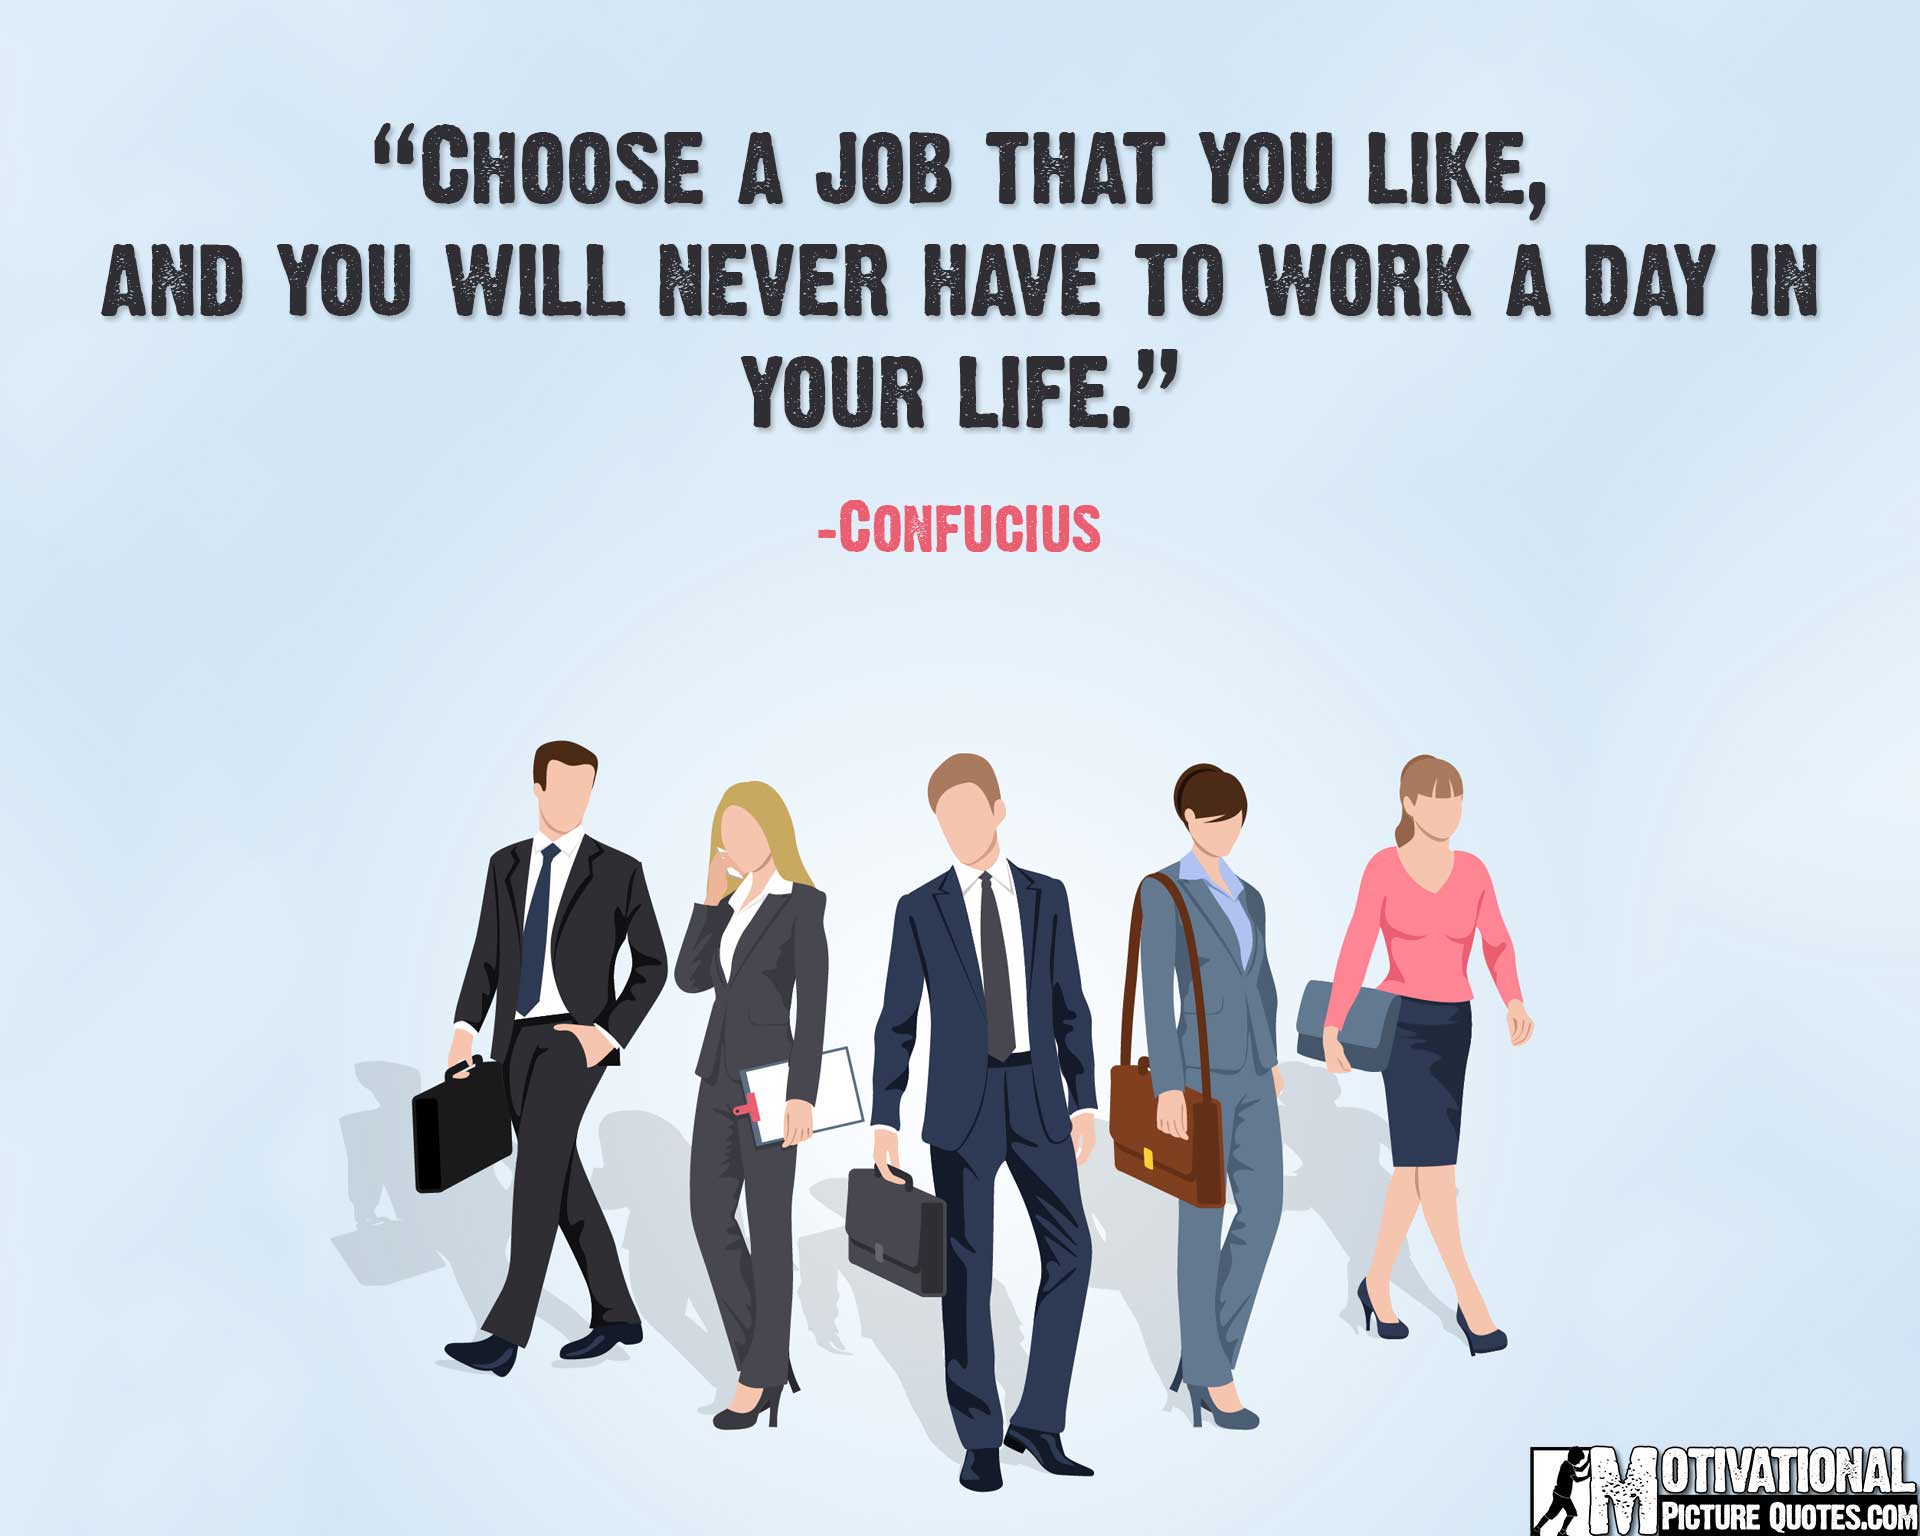 Job Satisfaction And Motivational Quotes With Image